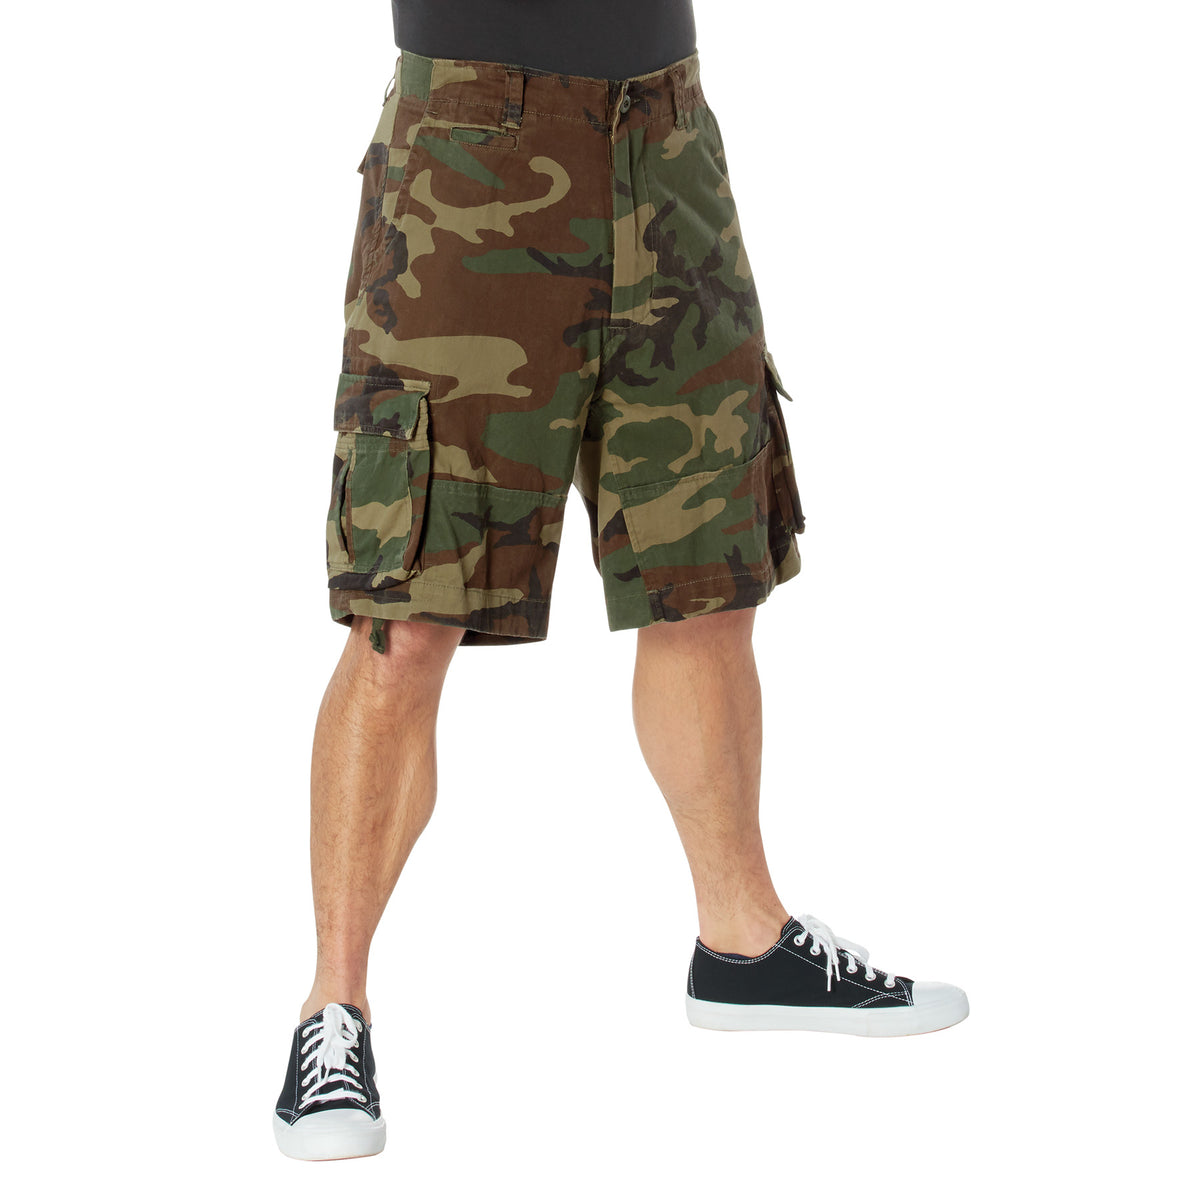 Rothco Vintage Camo Infantry Utility Shorts - Right